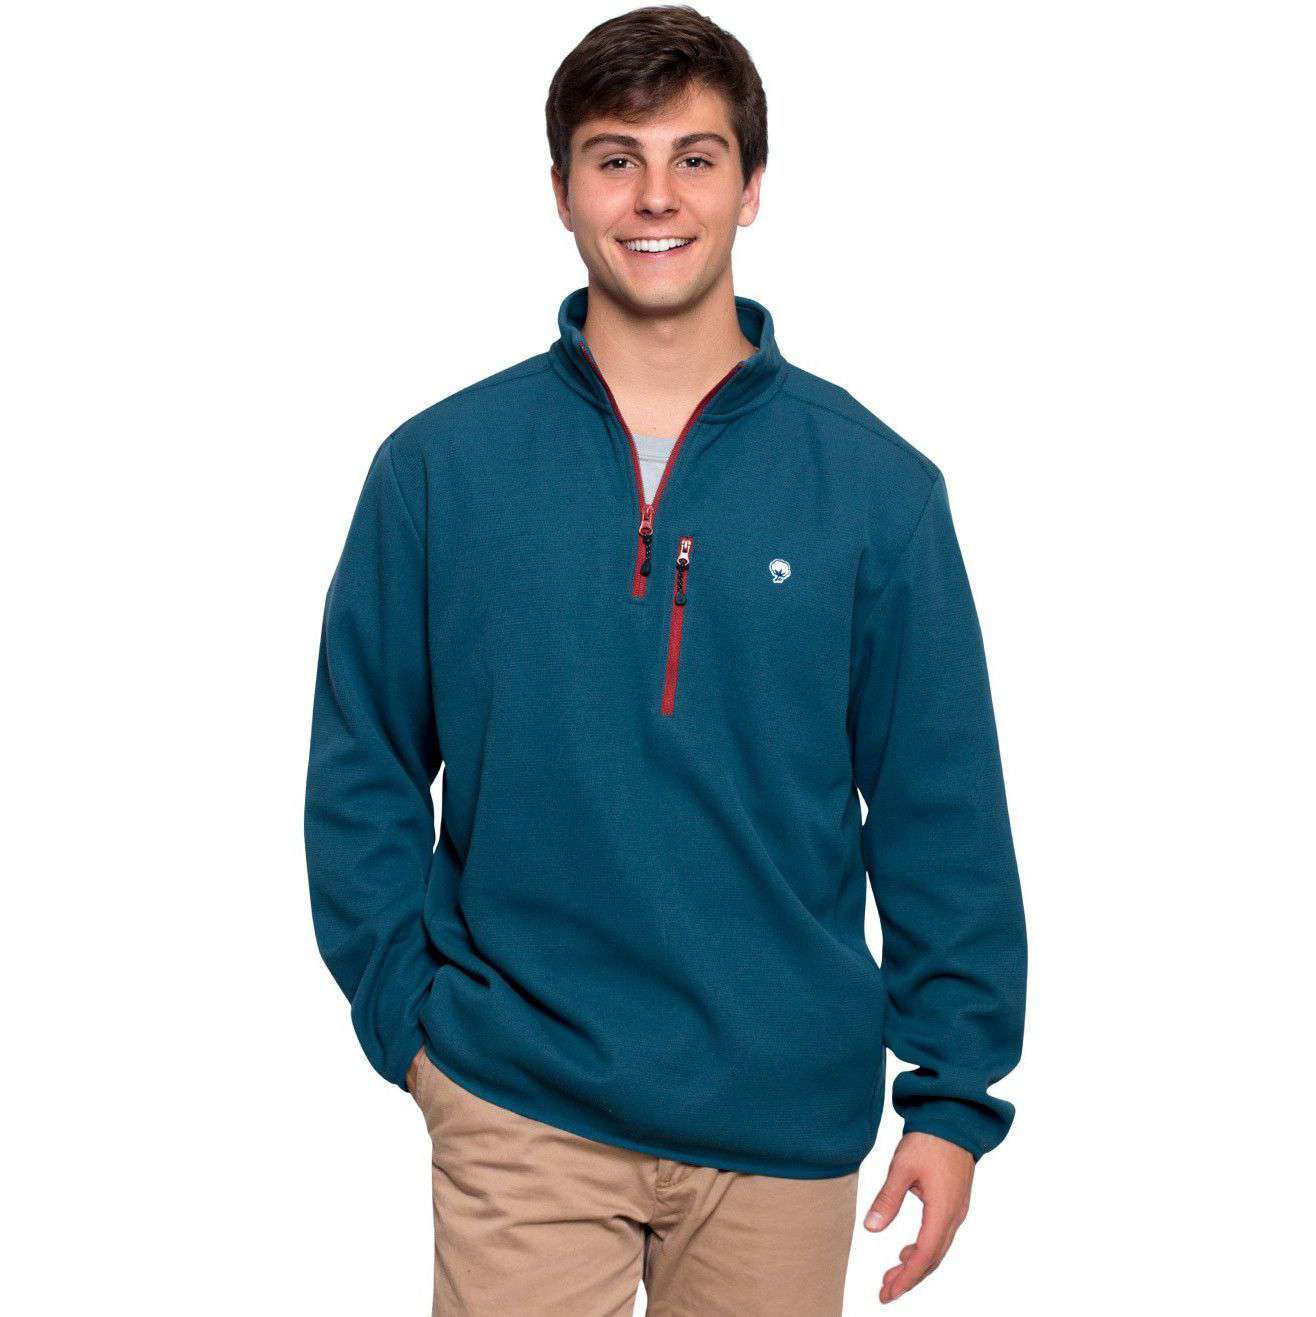 Keeler 1/4 Zip Pullover in Indian Teal by The Southern Shirt Co. - Country Club Prep